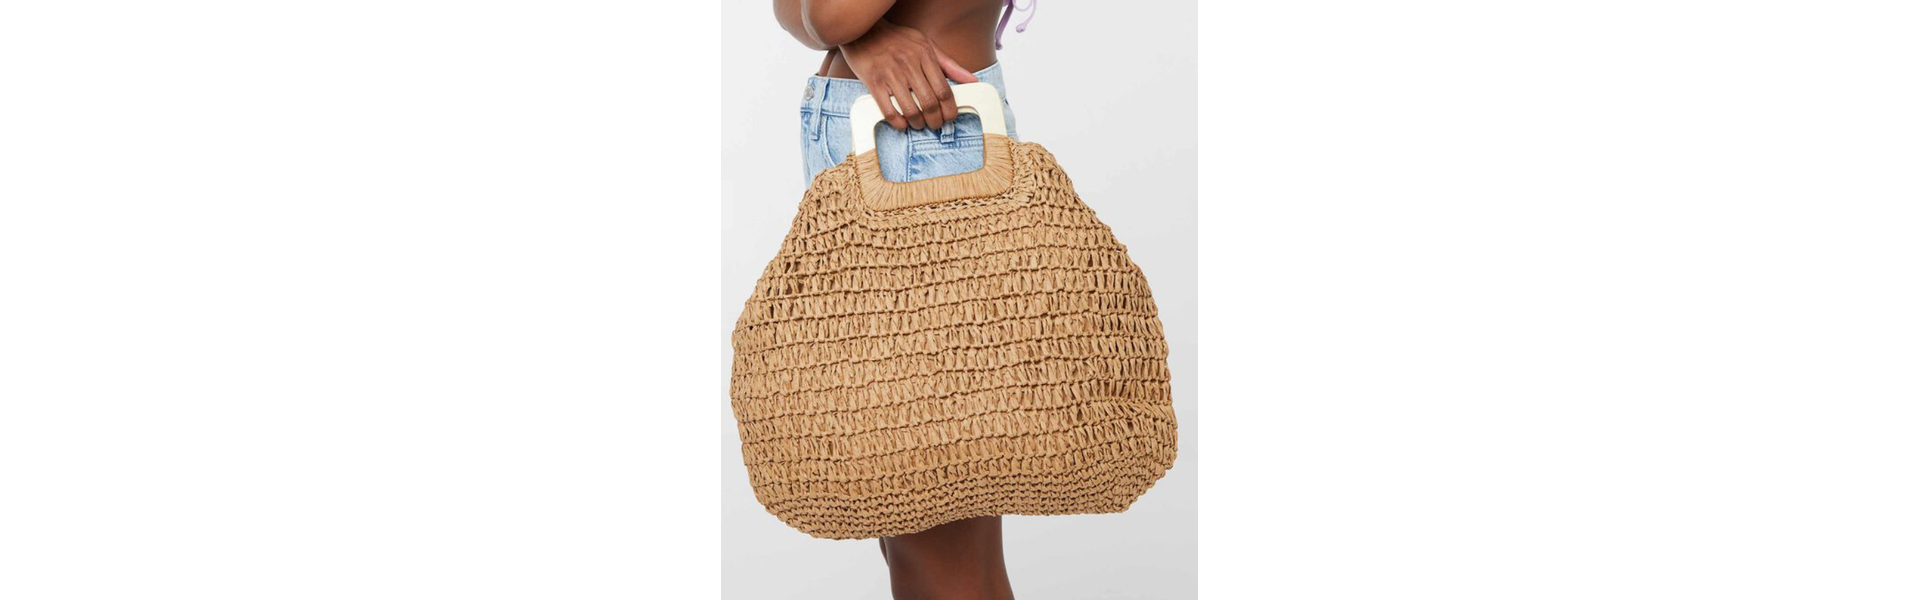 Woven straw tote bag, $29.90 at Ardène 